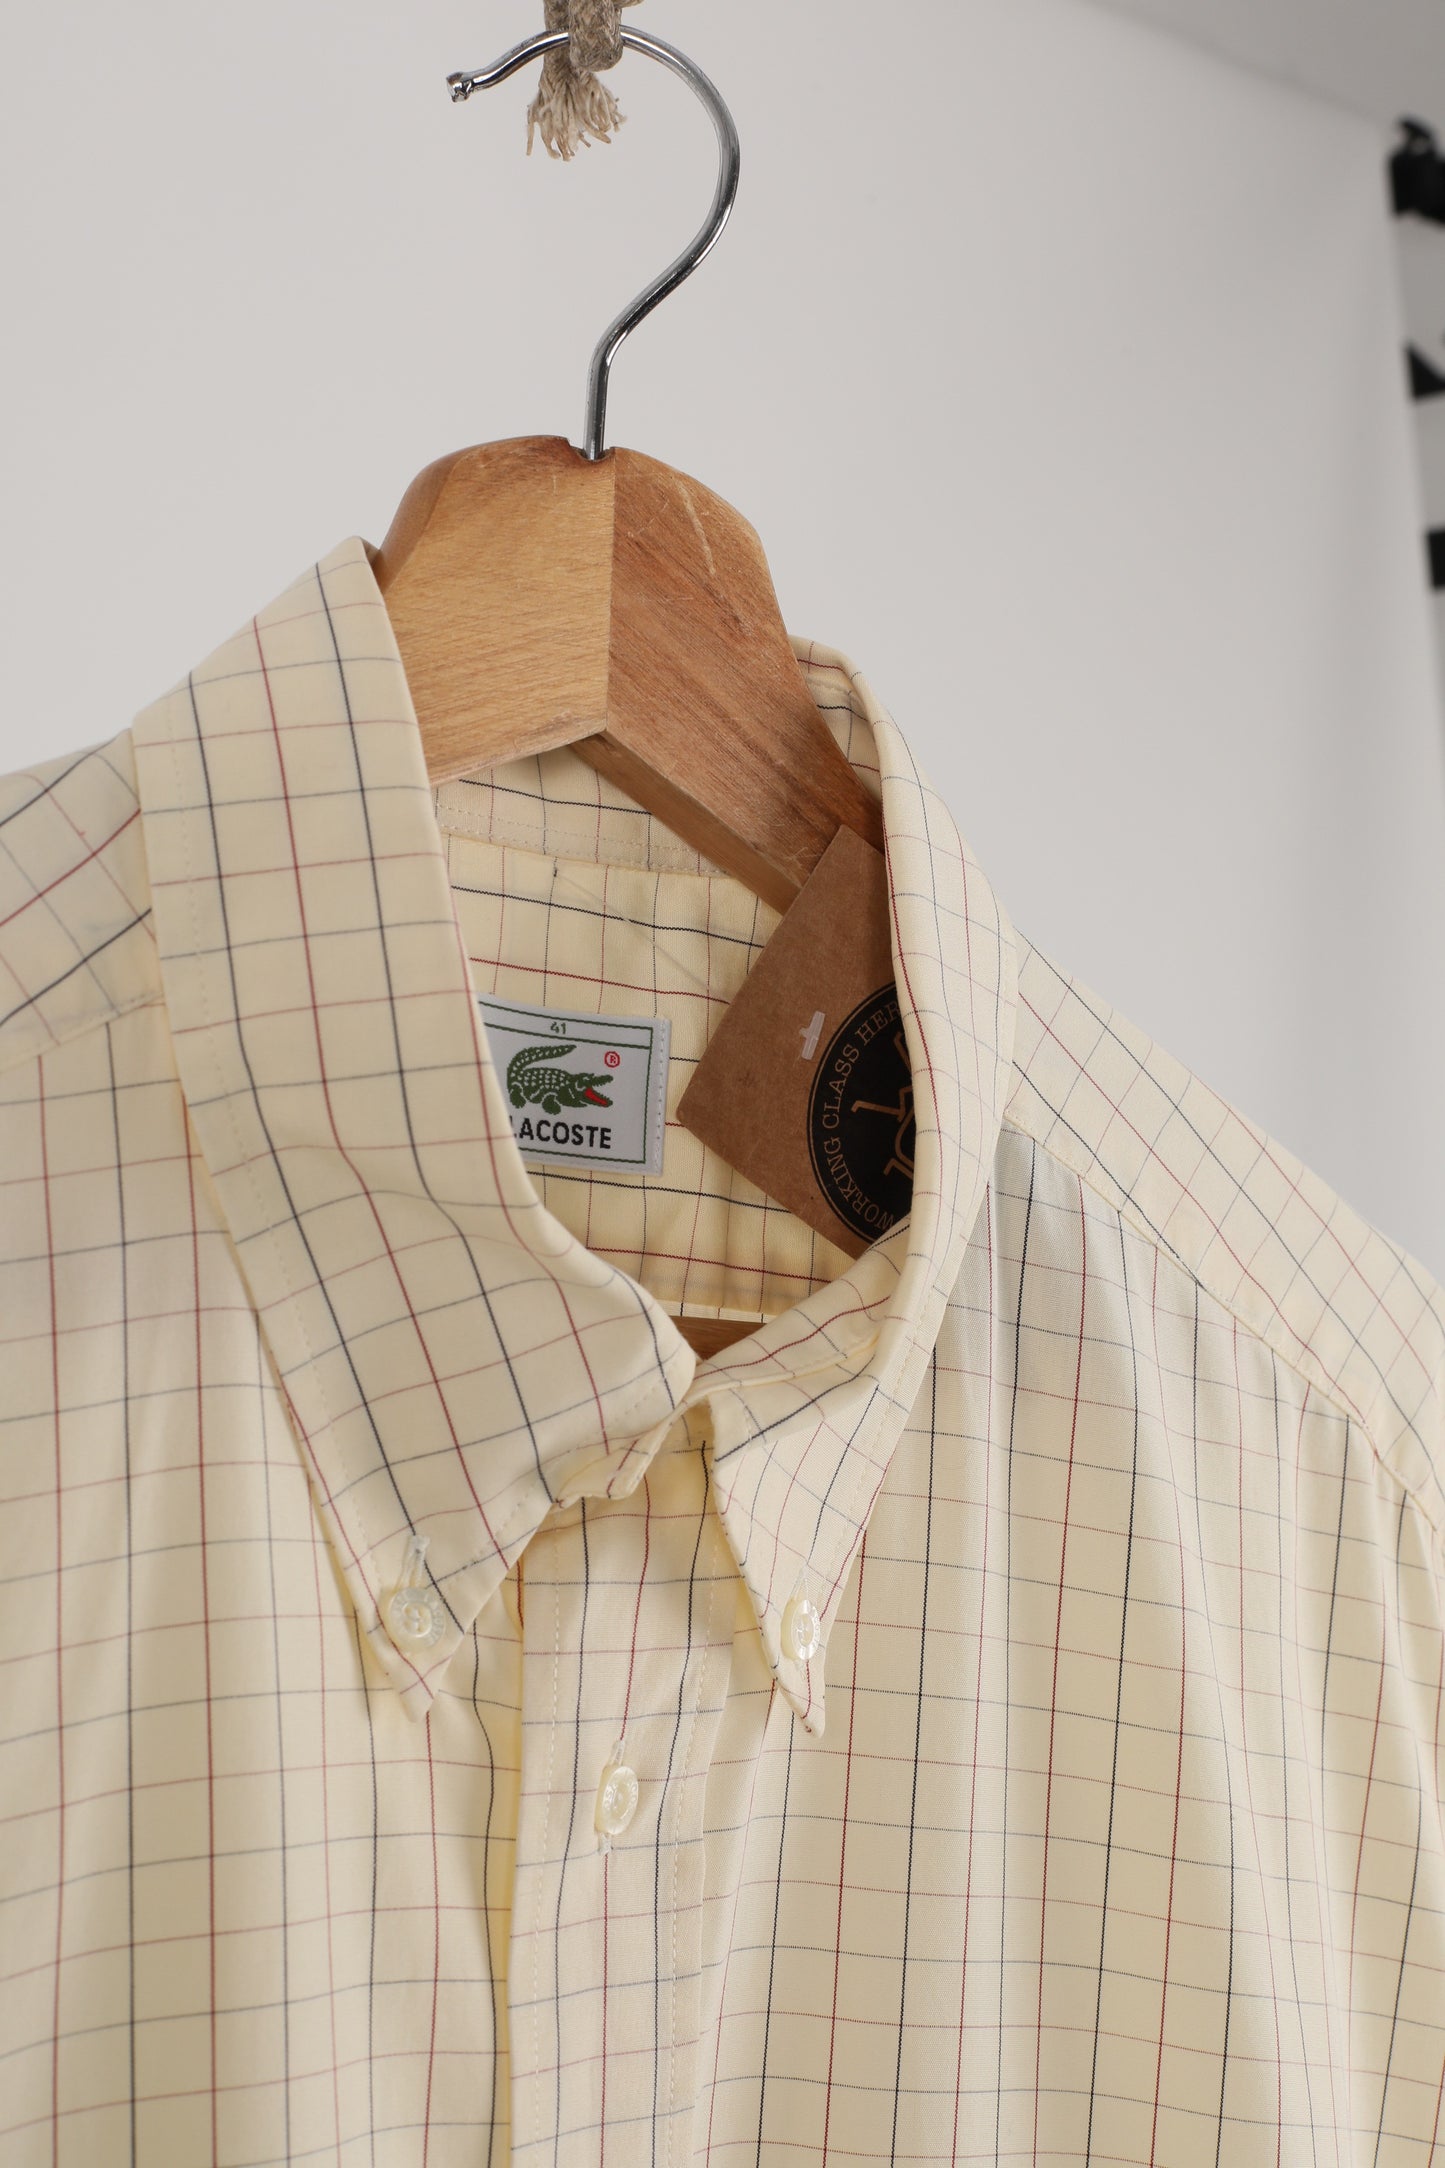 90s Lacoste short sleeve Oxford shirt (41)